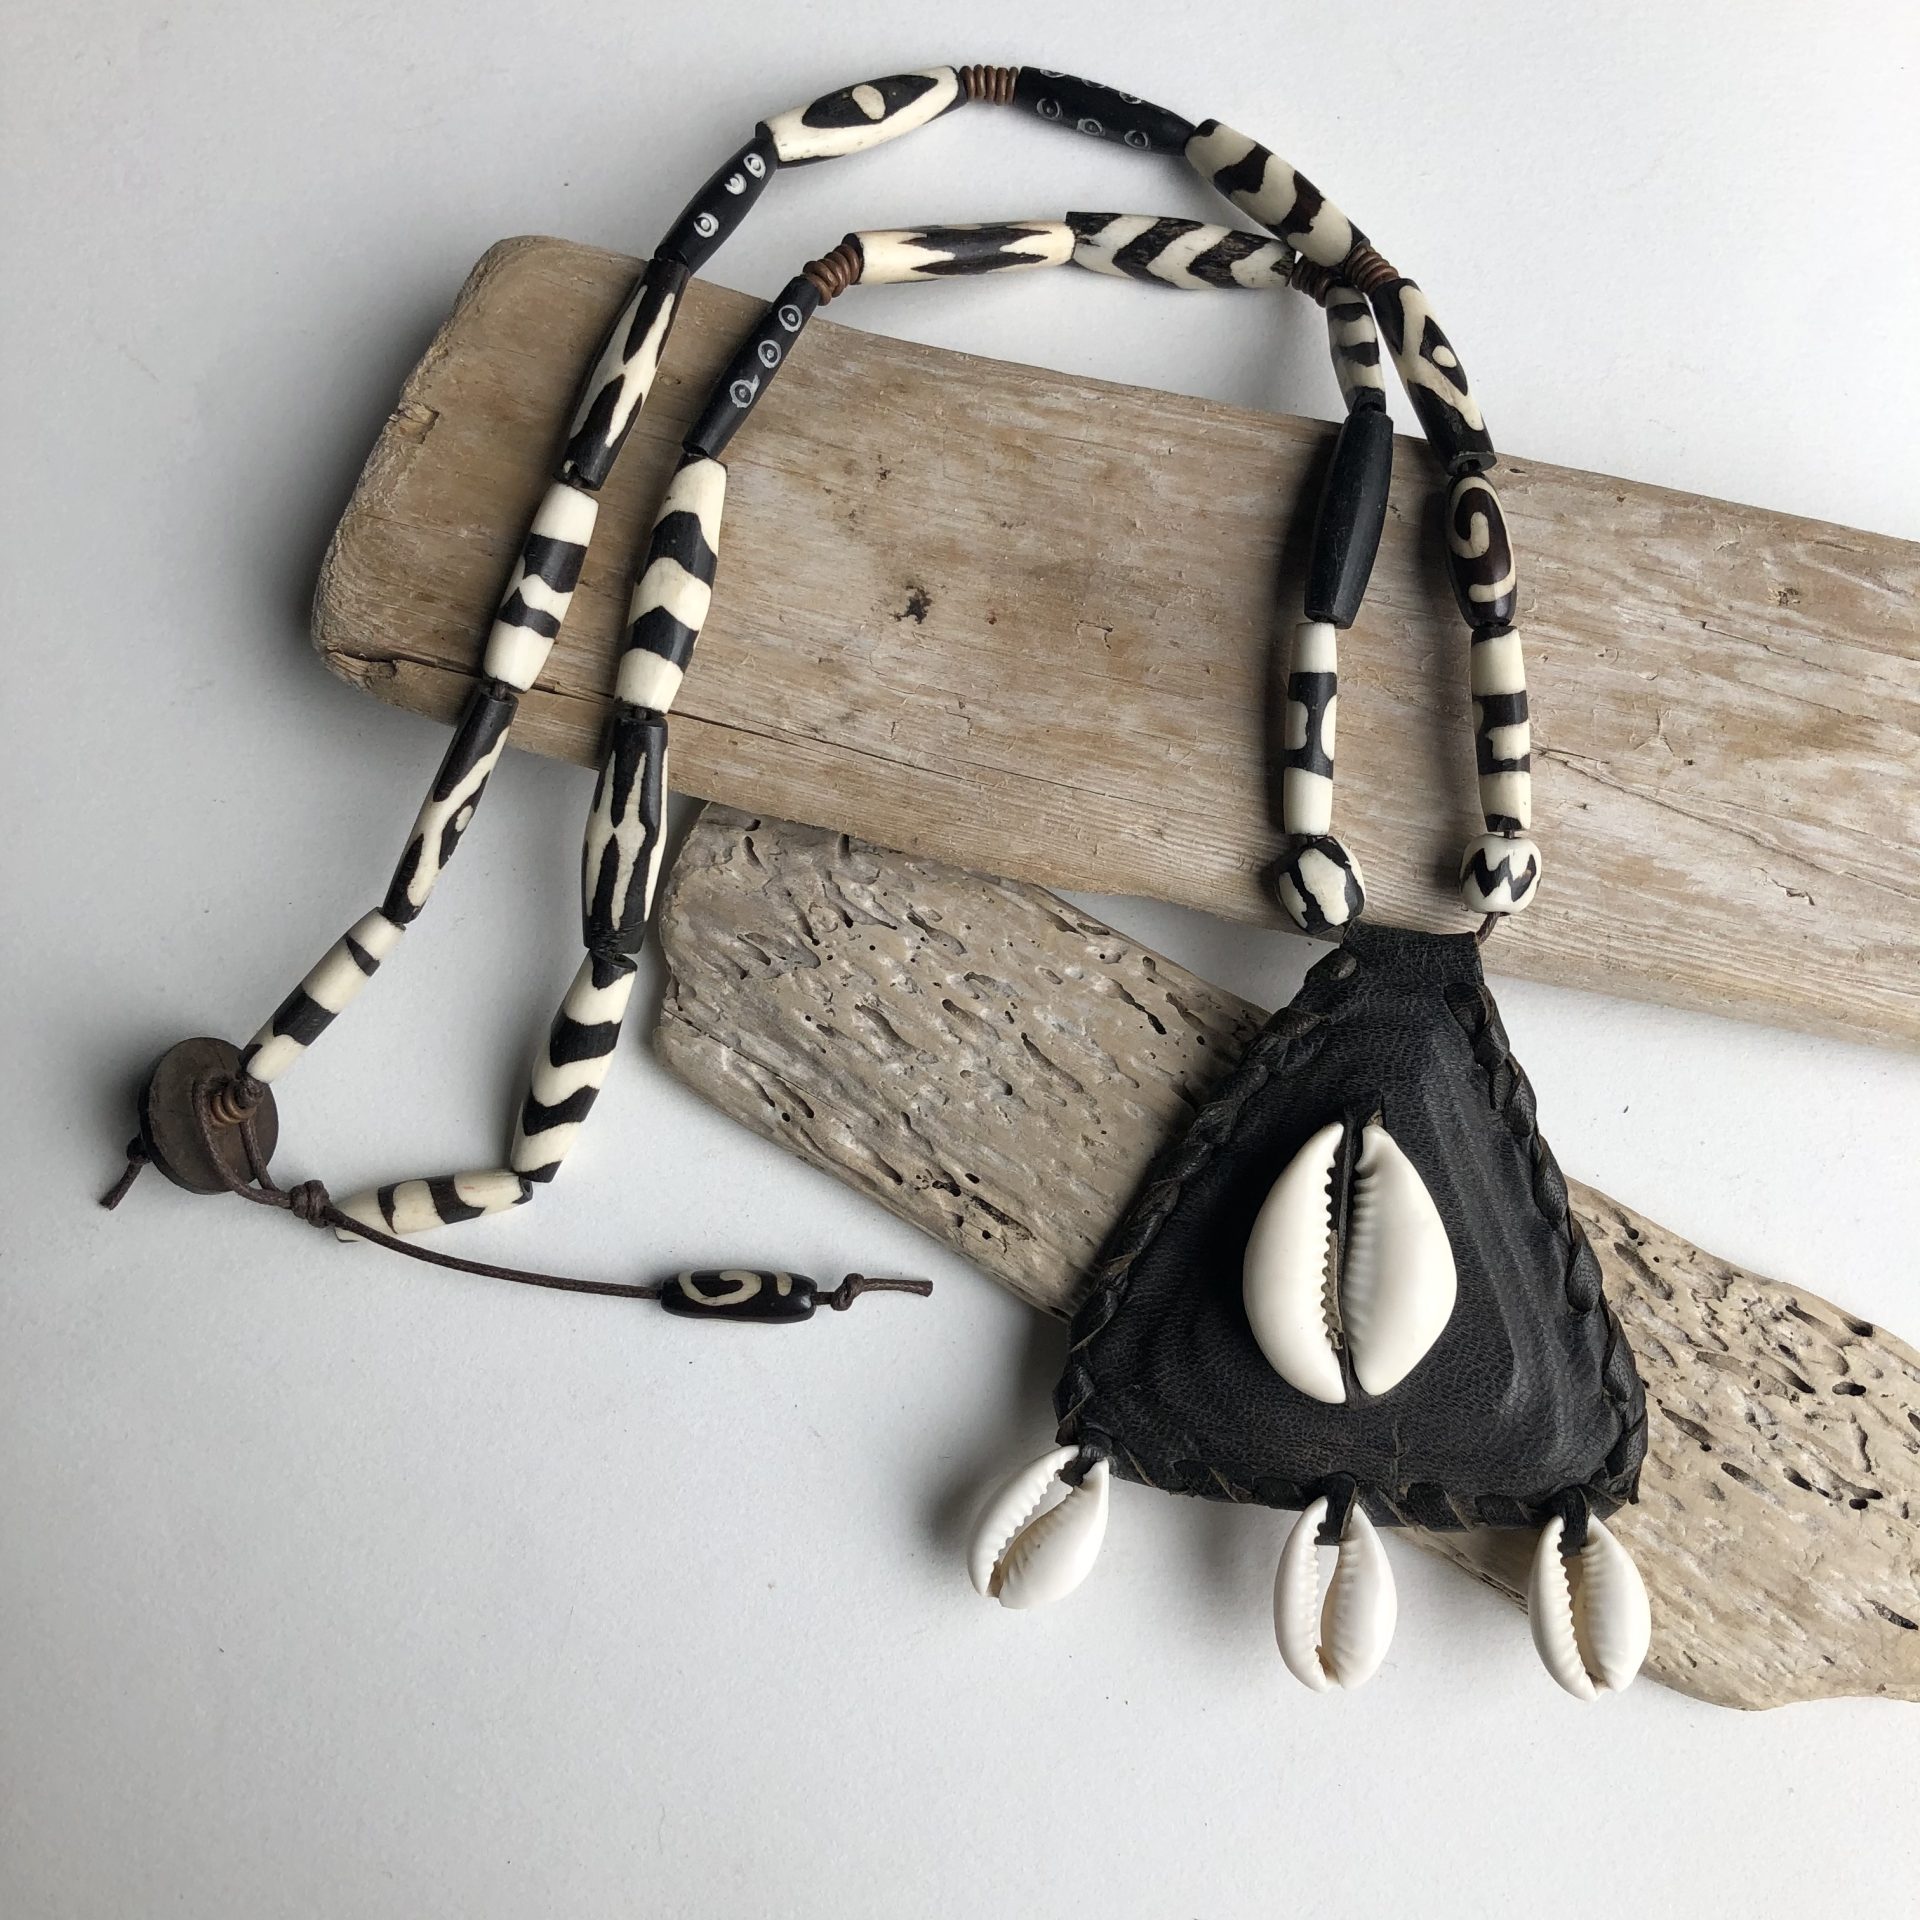 Cowrie Shell Pendant Necklace